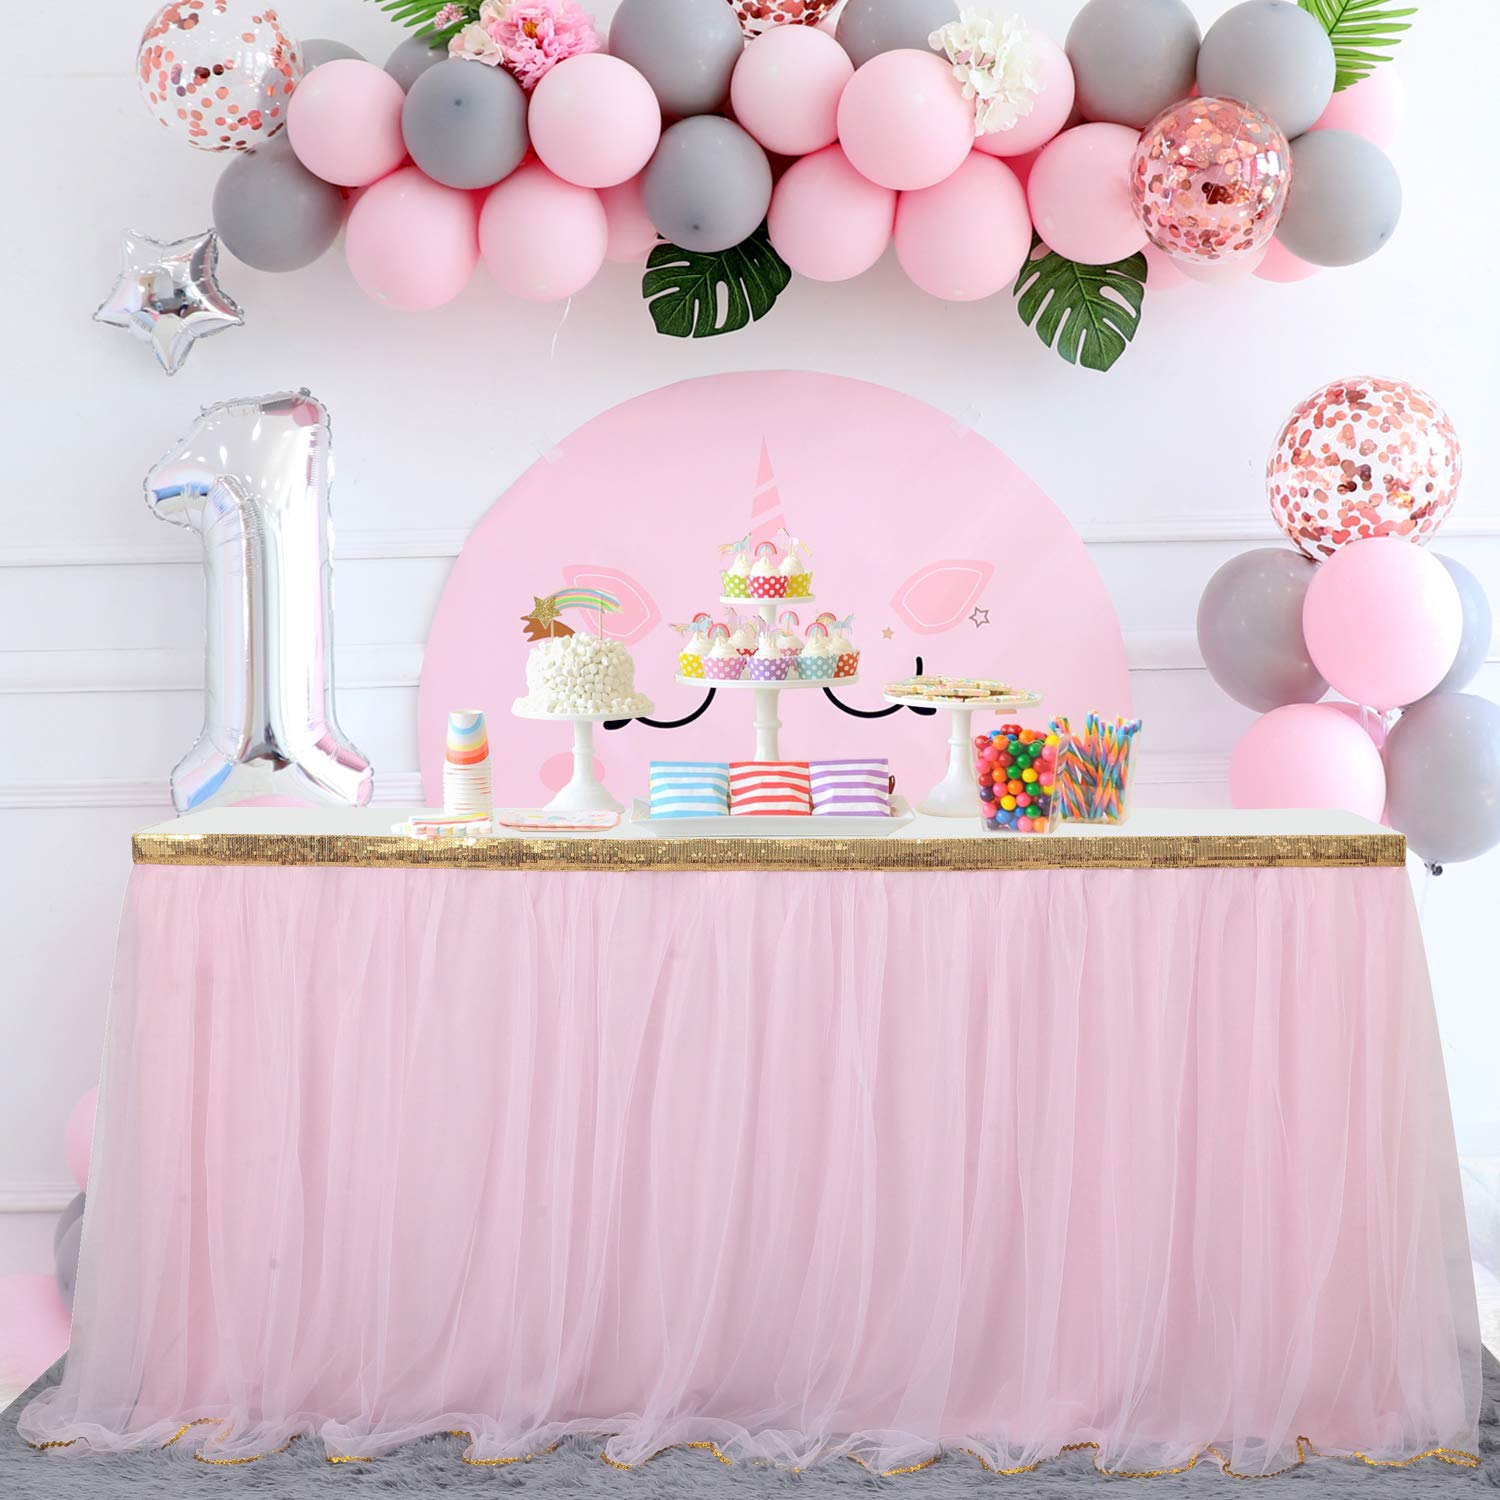 What are Some Simple Tips for Decorating a Table for a Birthday Party